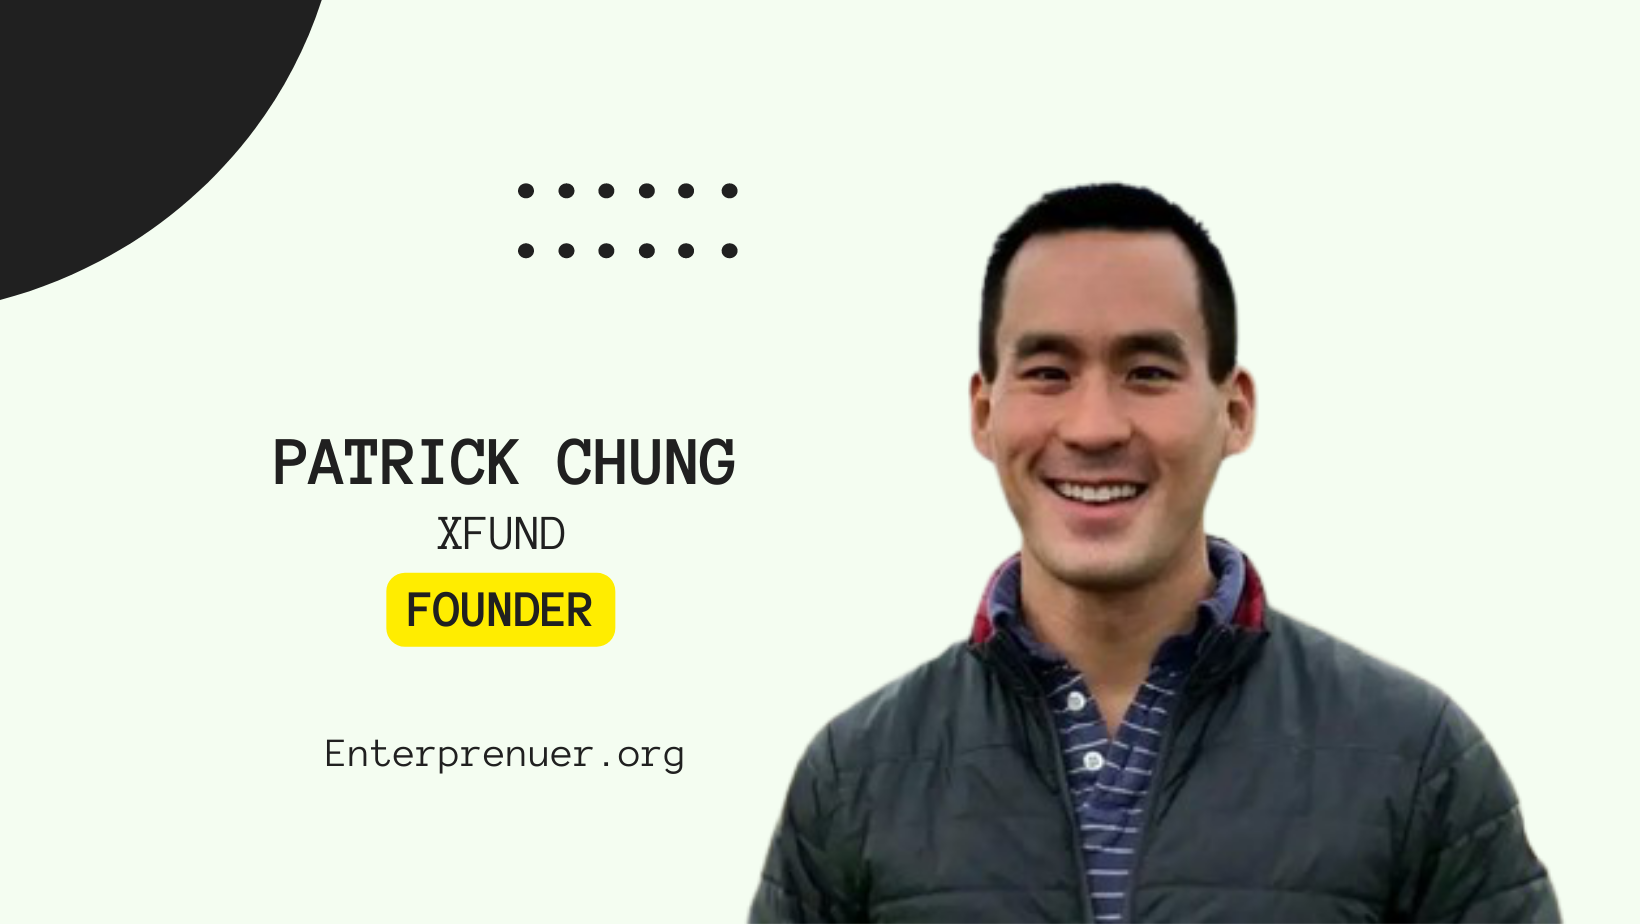 Patrick Chung Founder of Xfund